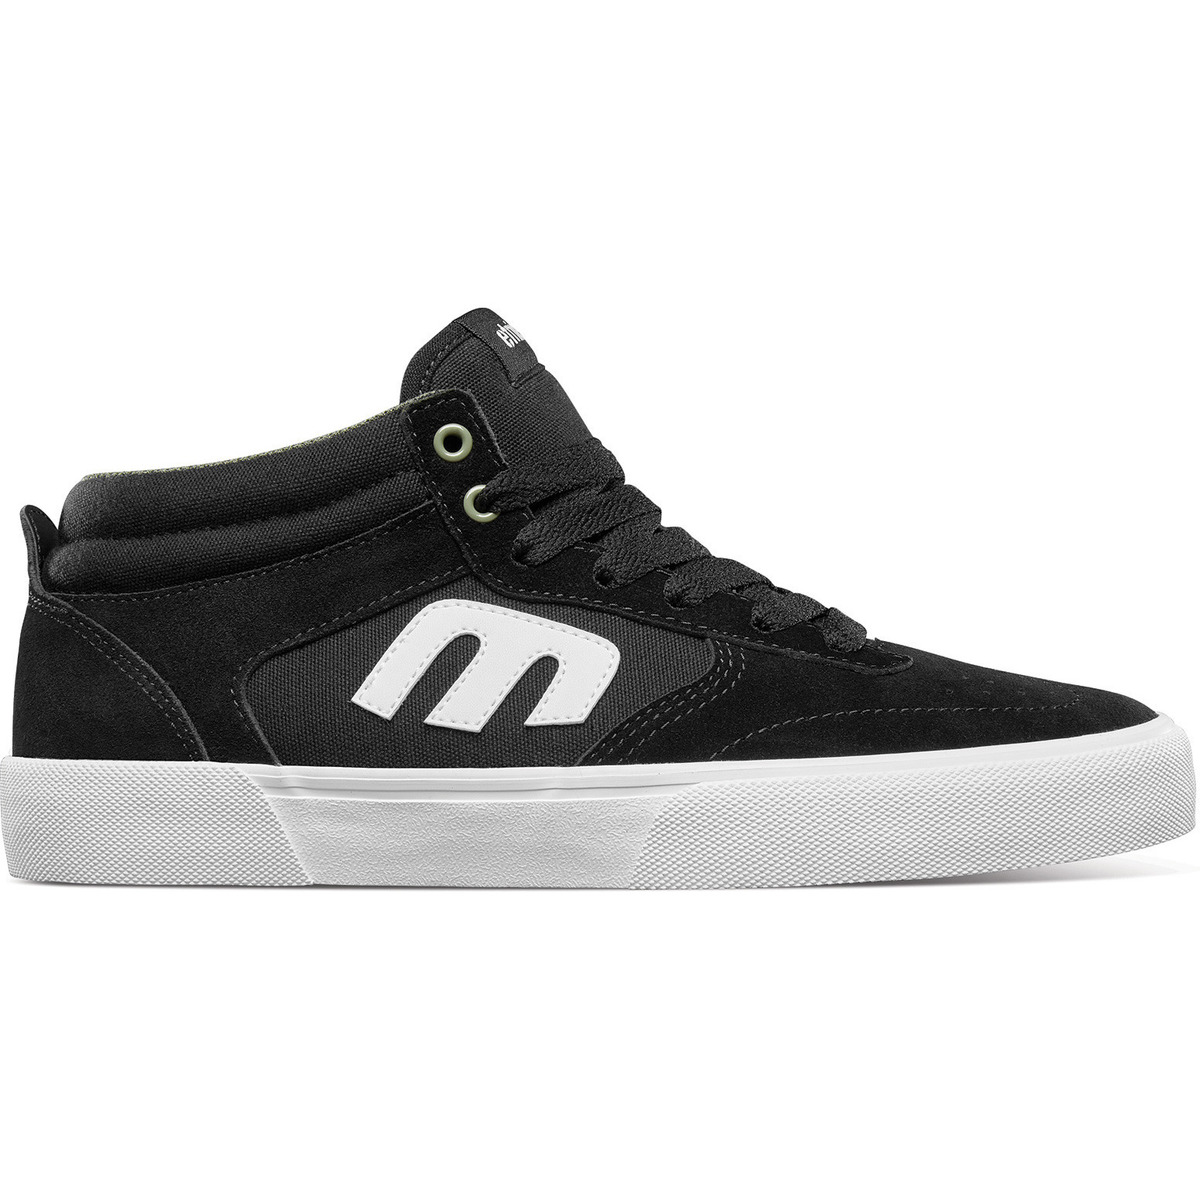 Chaussures Oh My Bag Etnies WINDROW VULC MID BLACK WHITE 